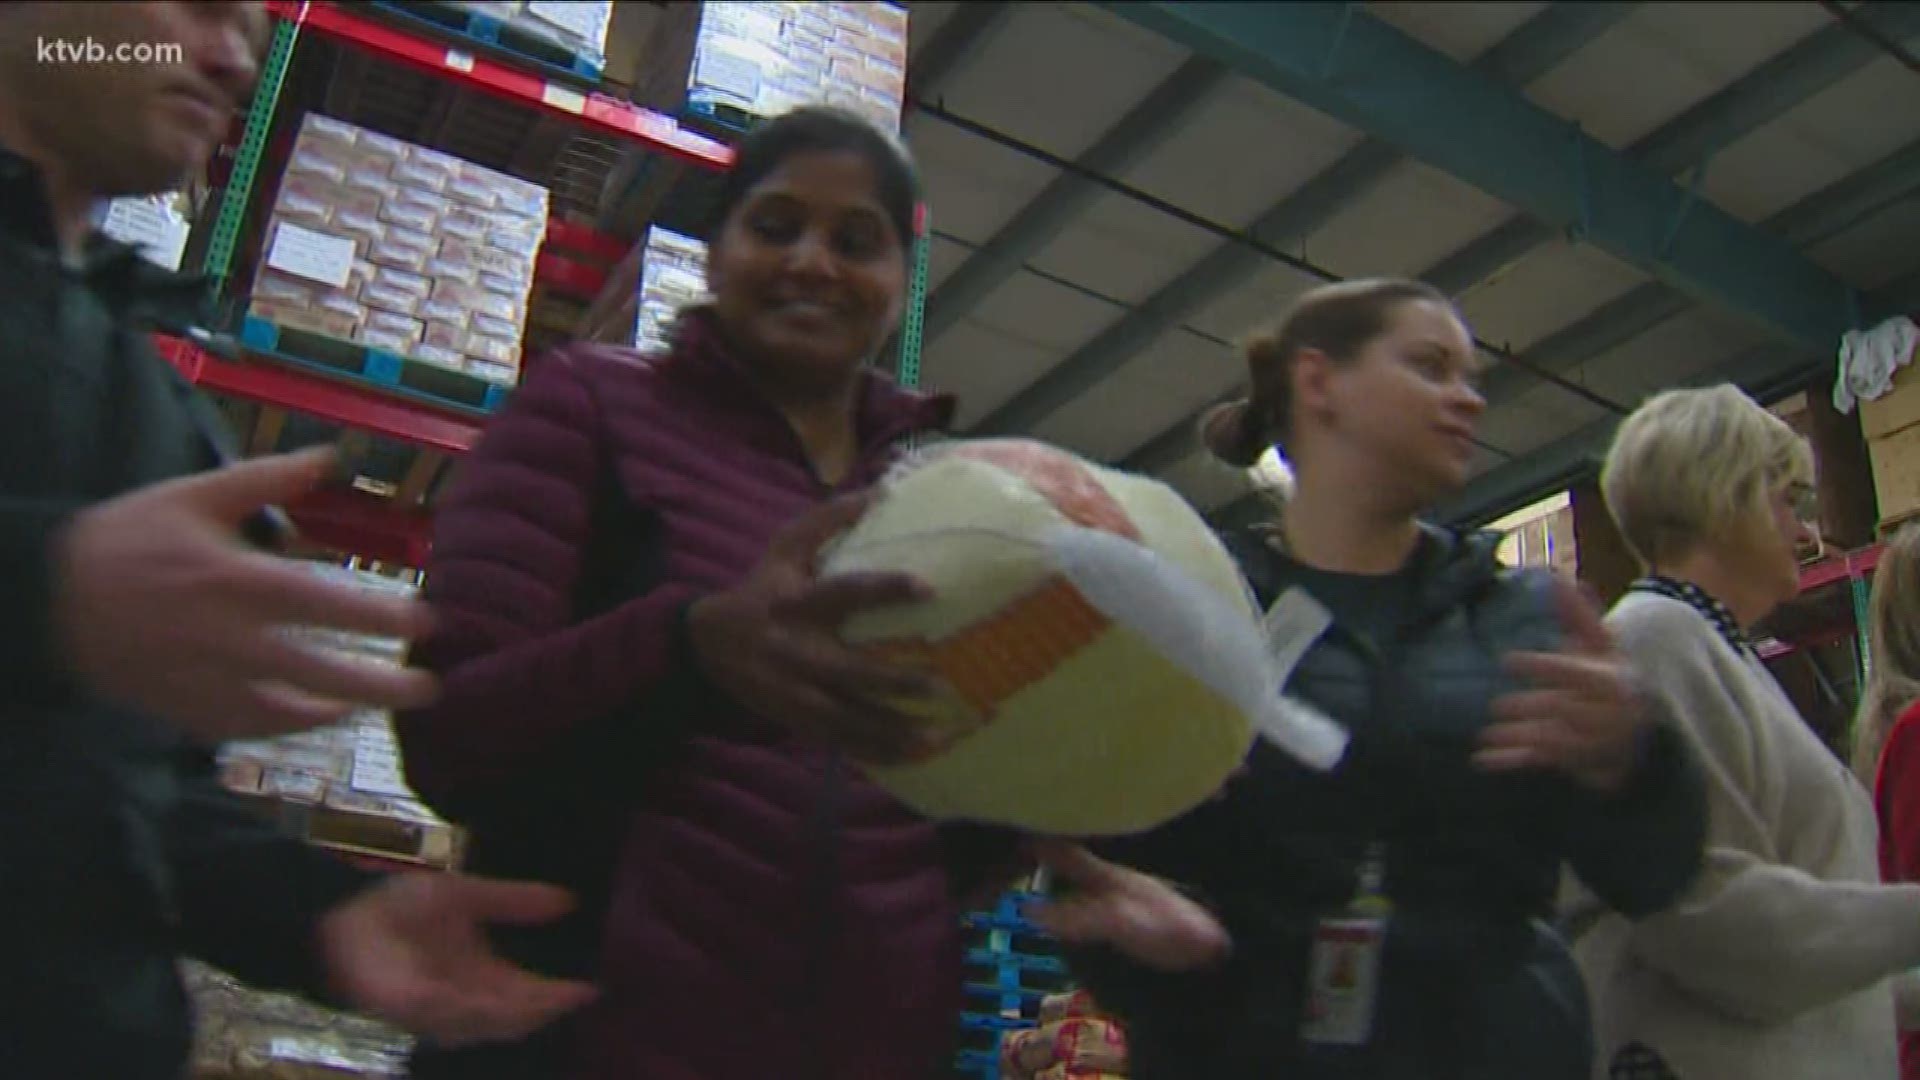 They gave nearly 1,700 turkeys and hams to the foodbank Tuesday.